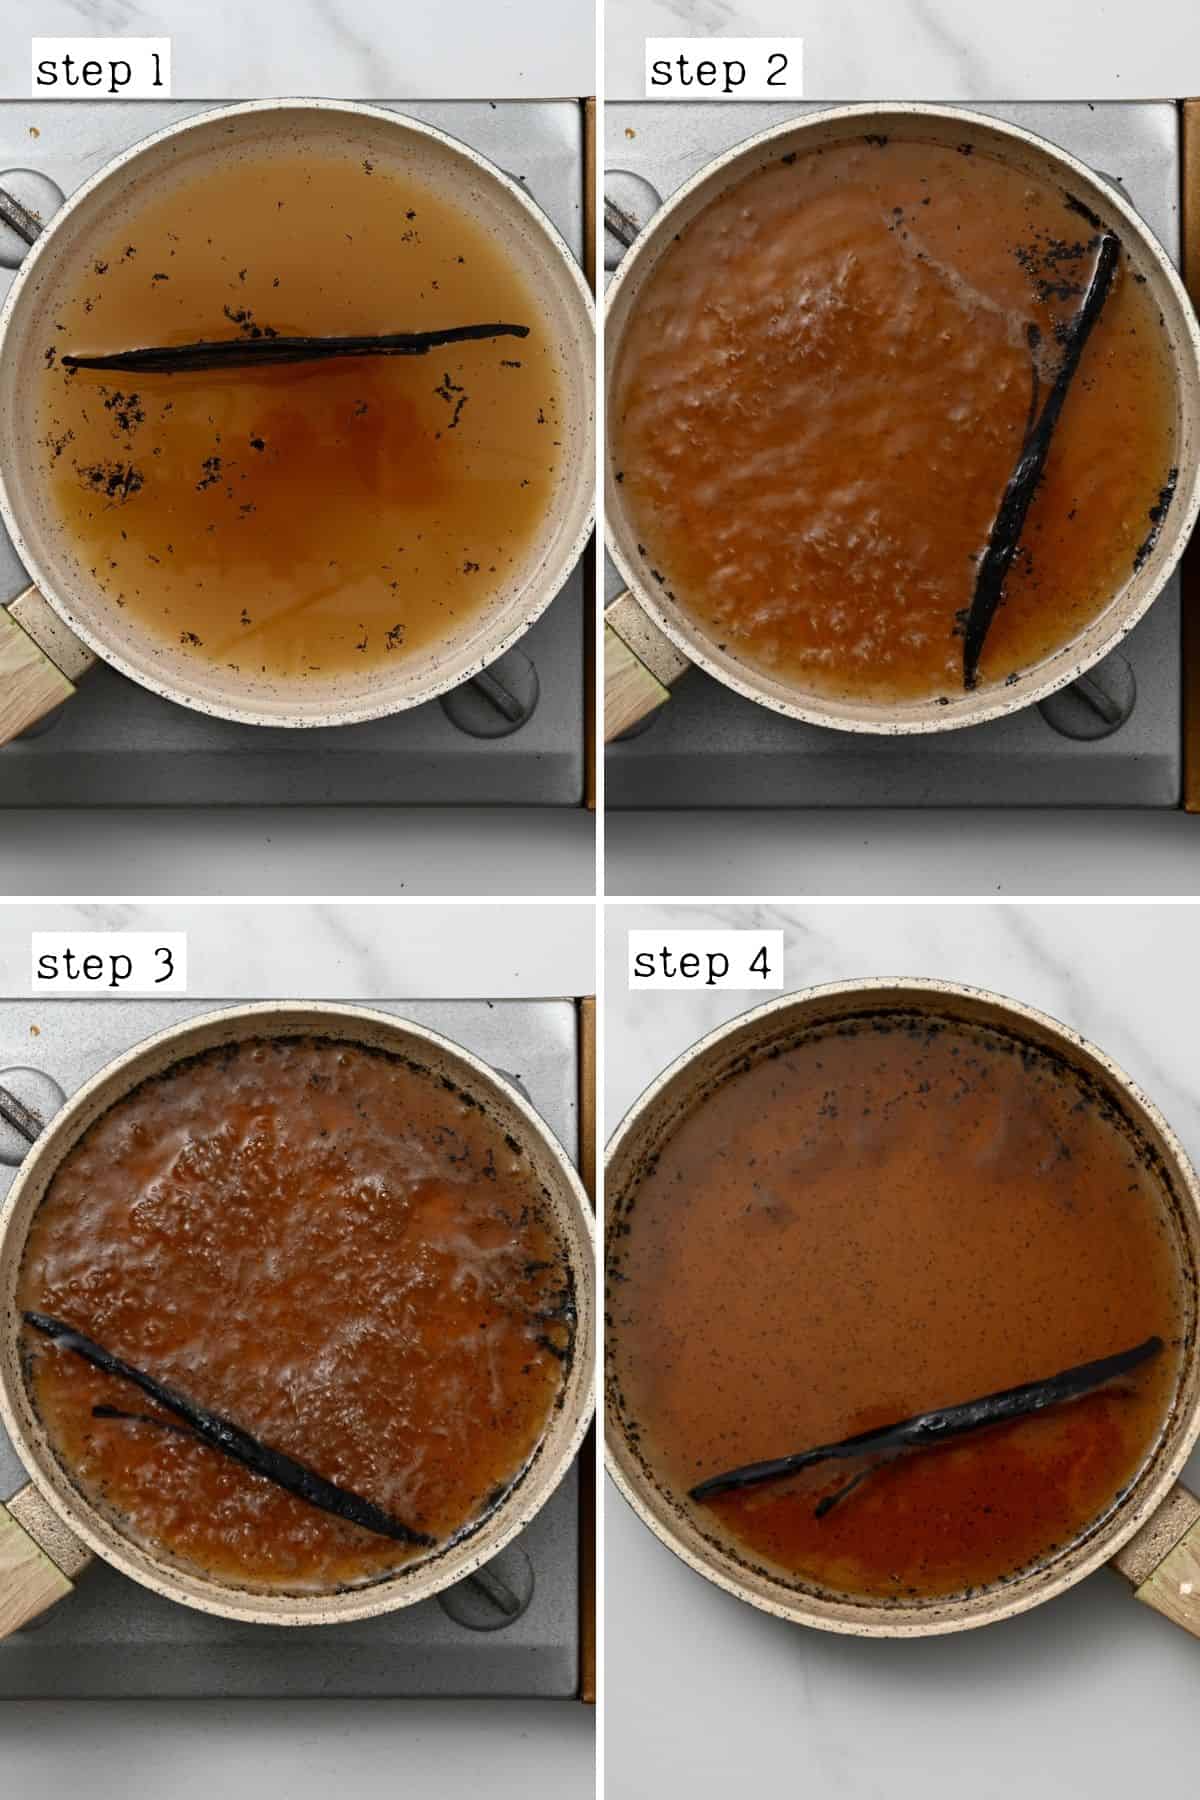 Steps for making vanilla syrup